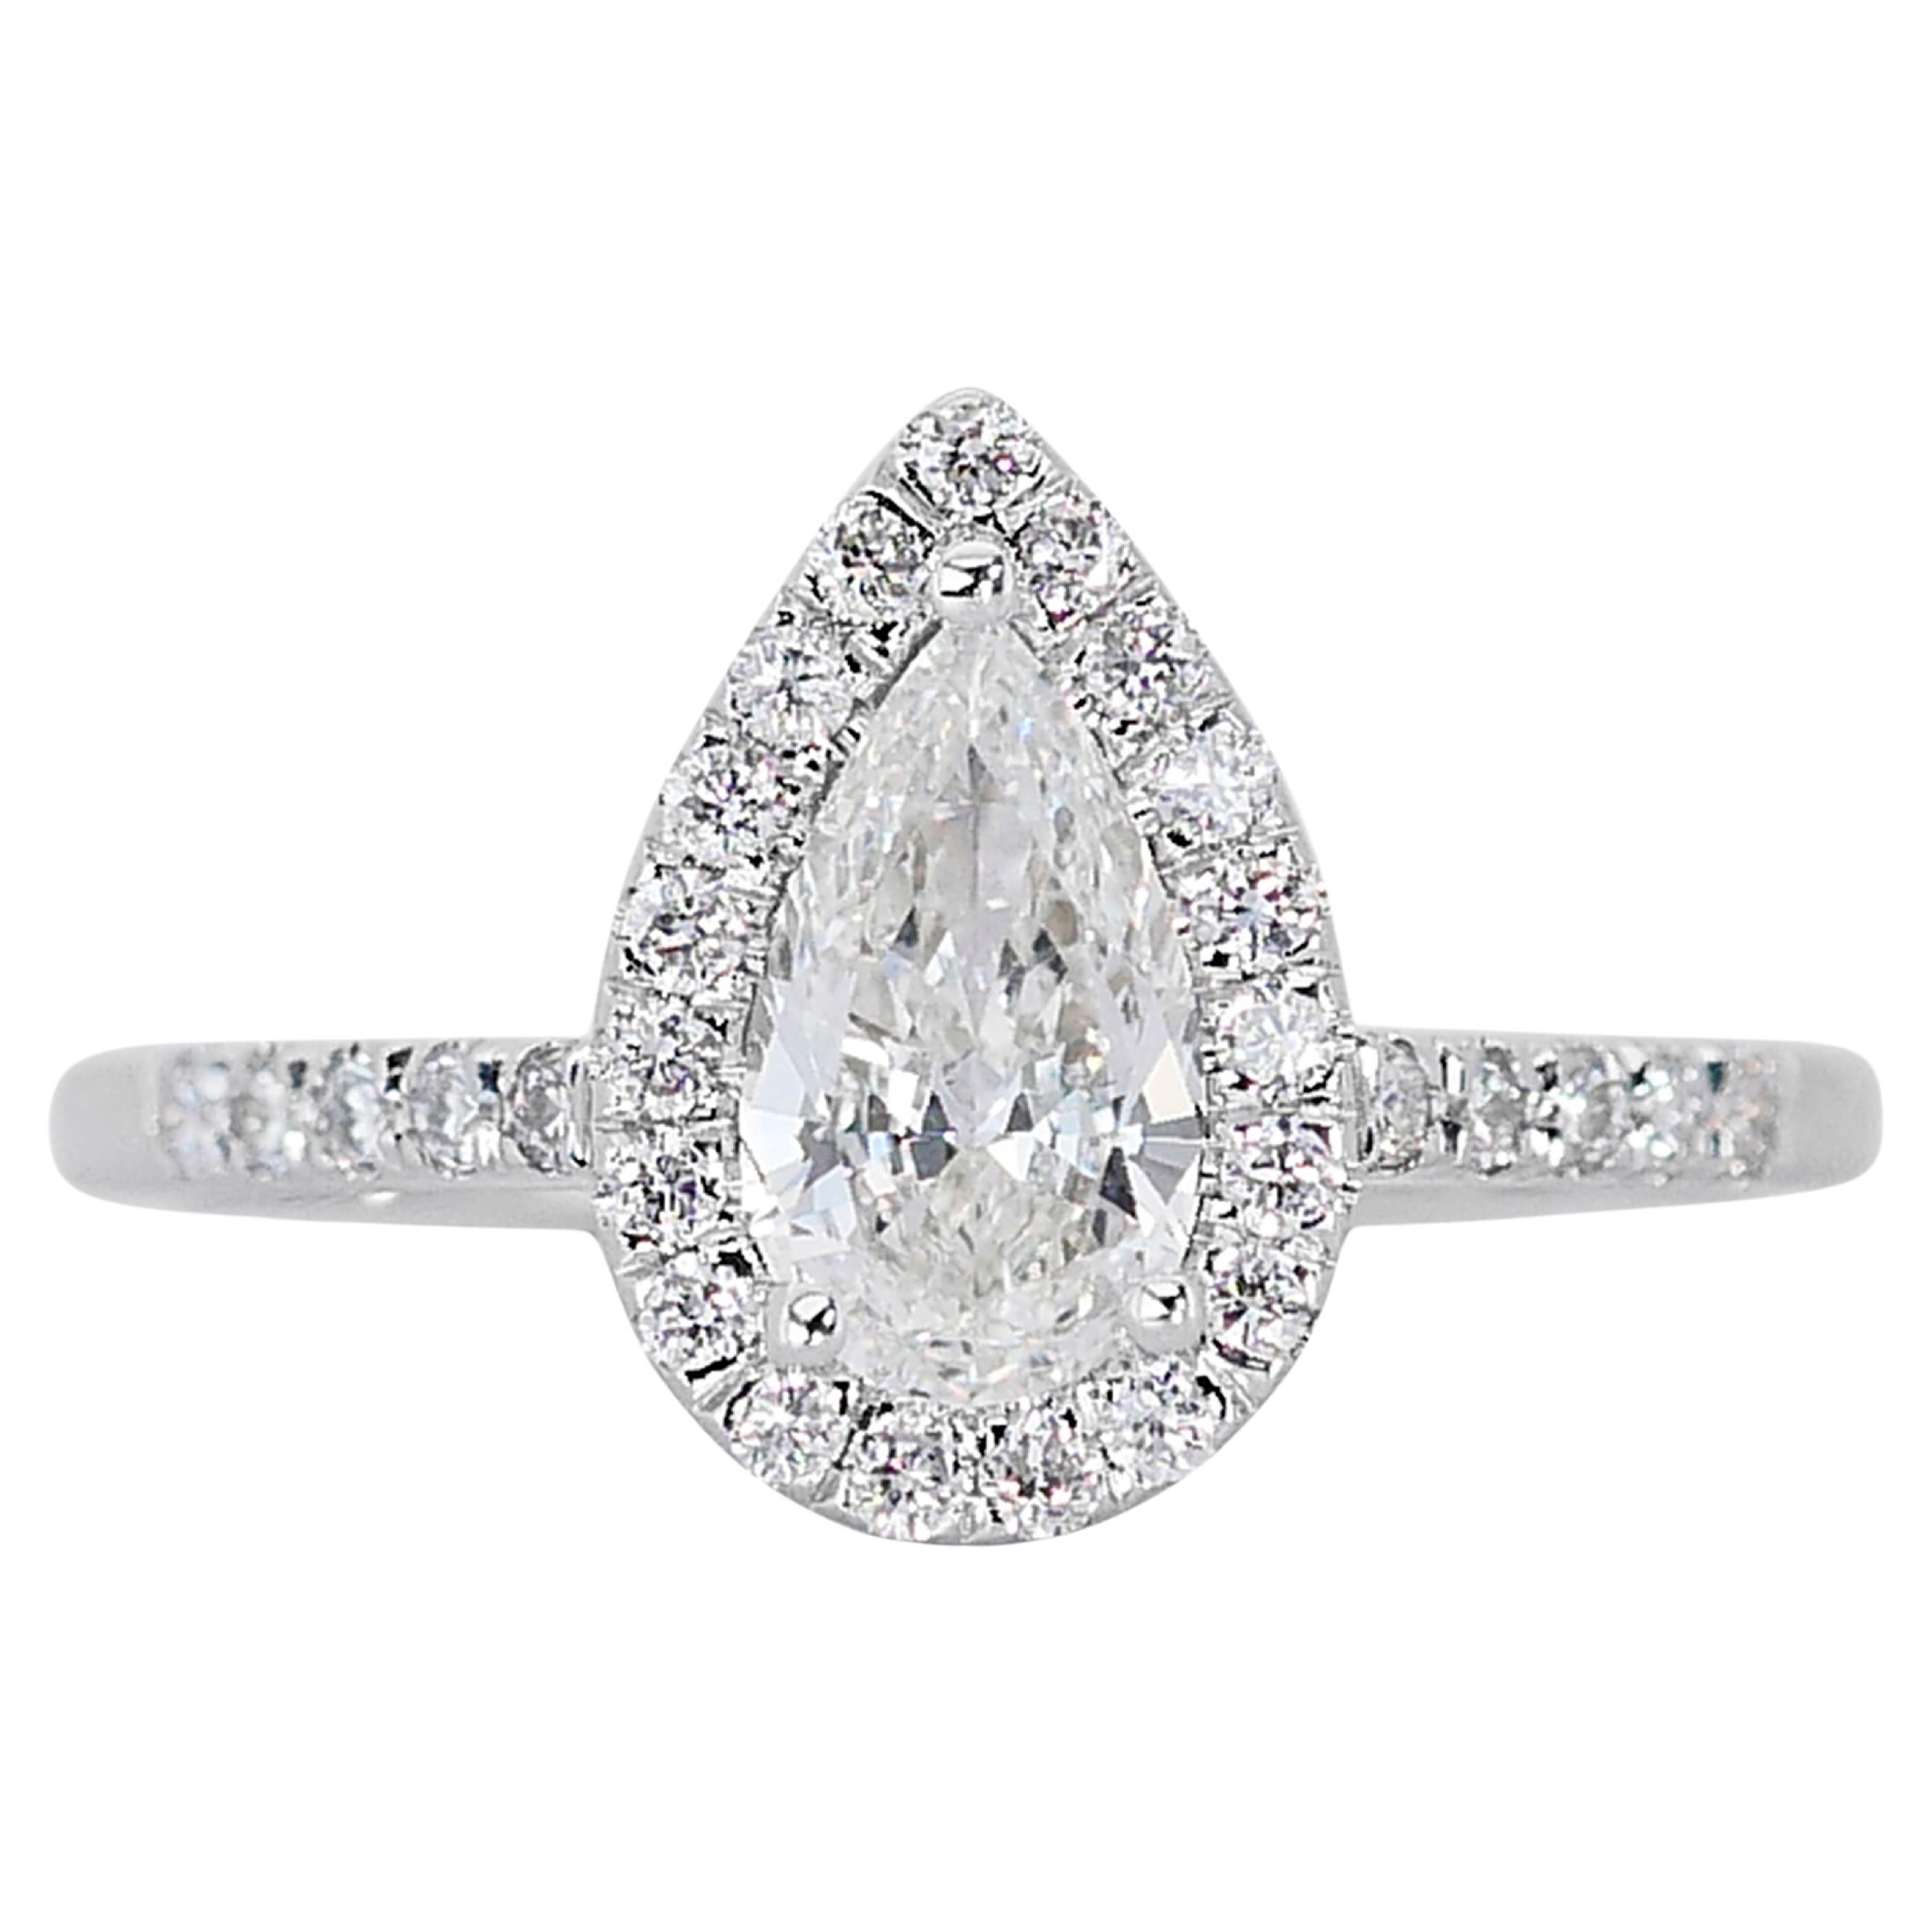 Stunning 1.97ct Pear-Shaped Diamond Halo Ring in 18k White Gold - GIA Certified